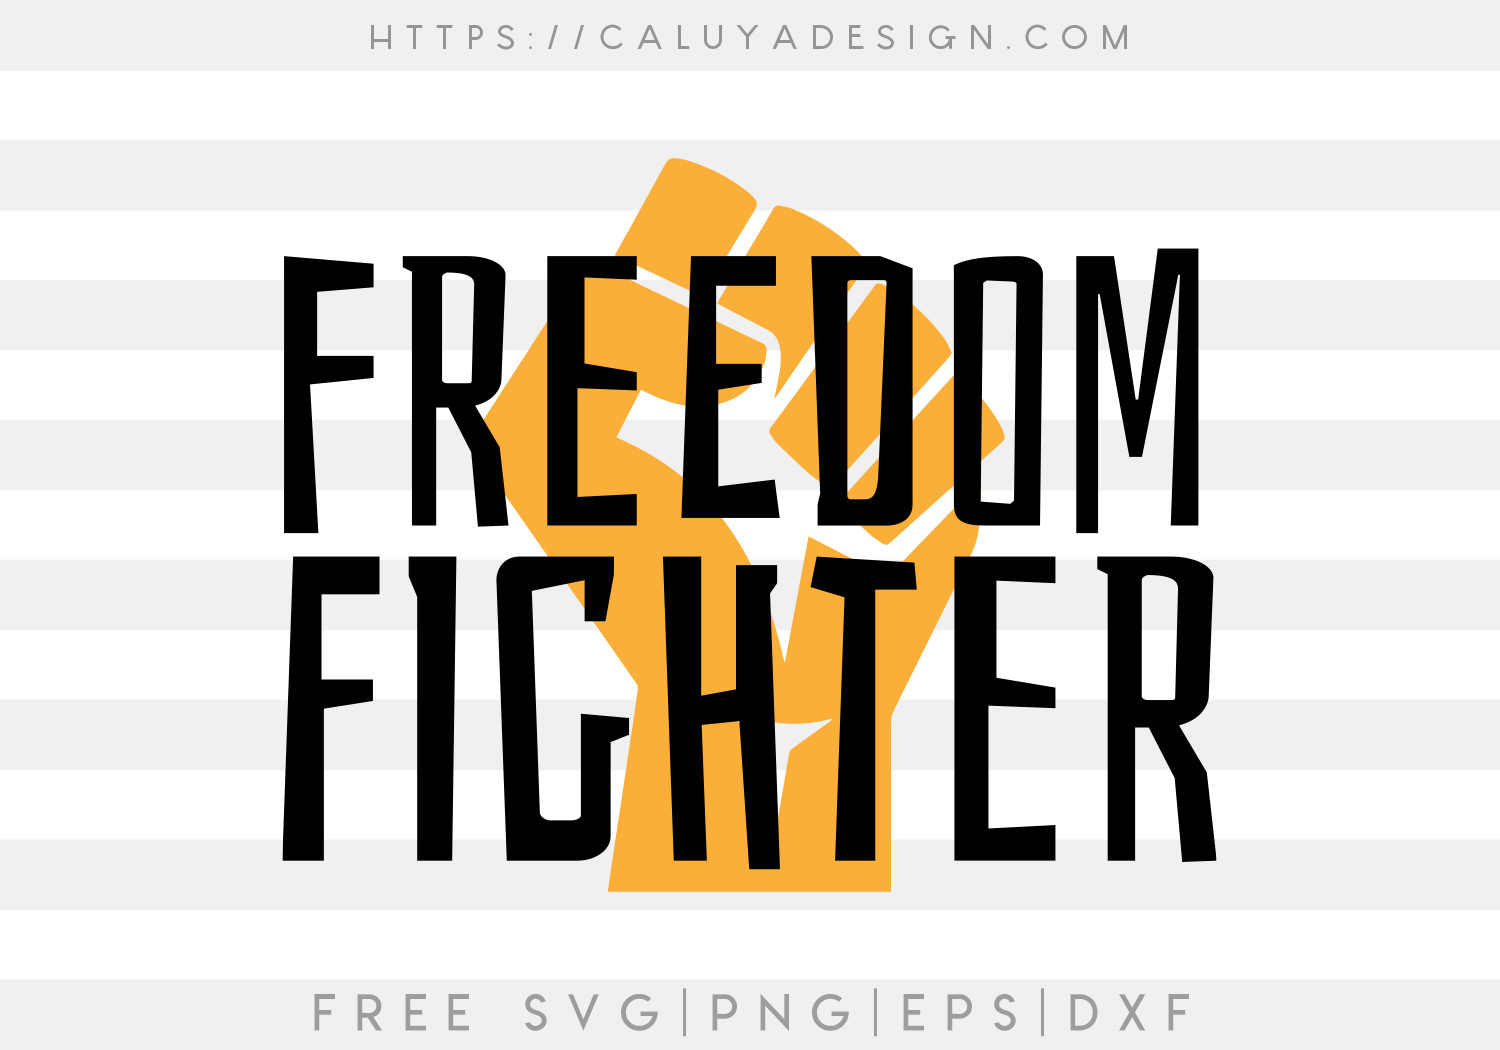 Freedom Fighter SVG, PNG, EPS & DXF